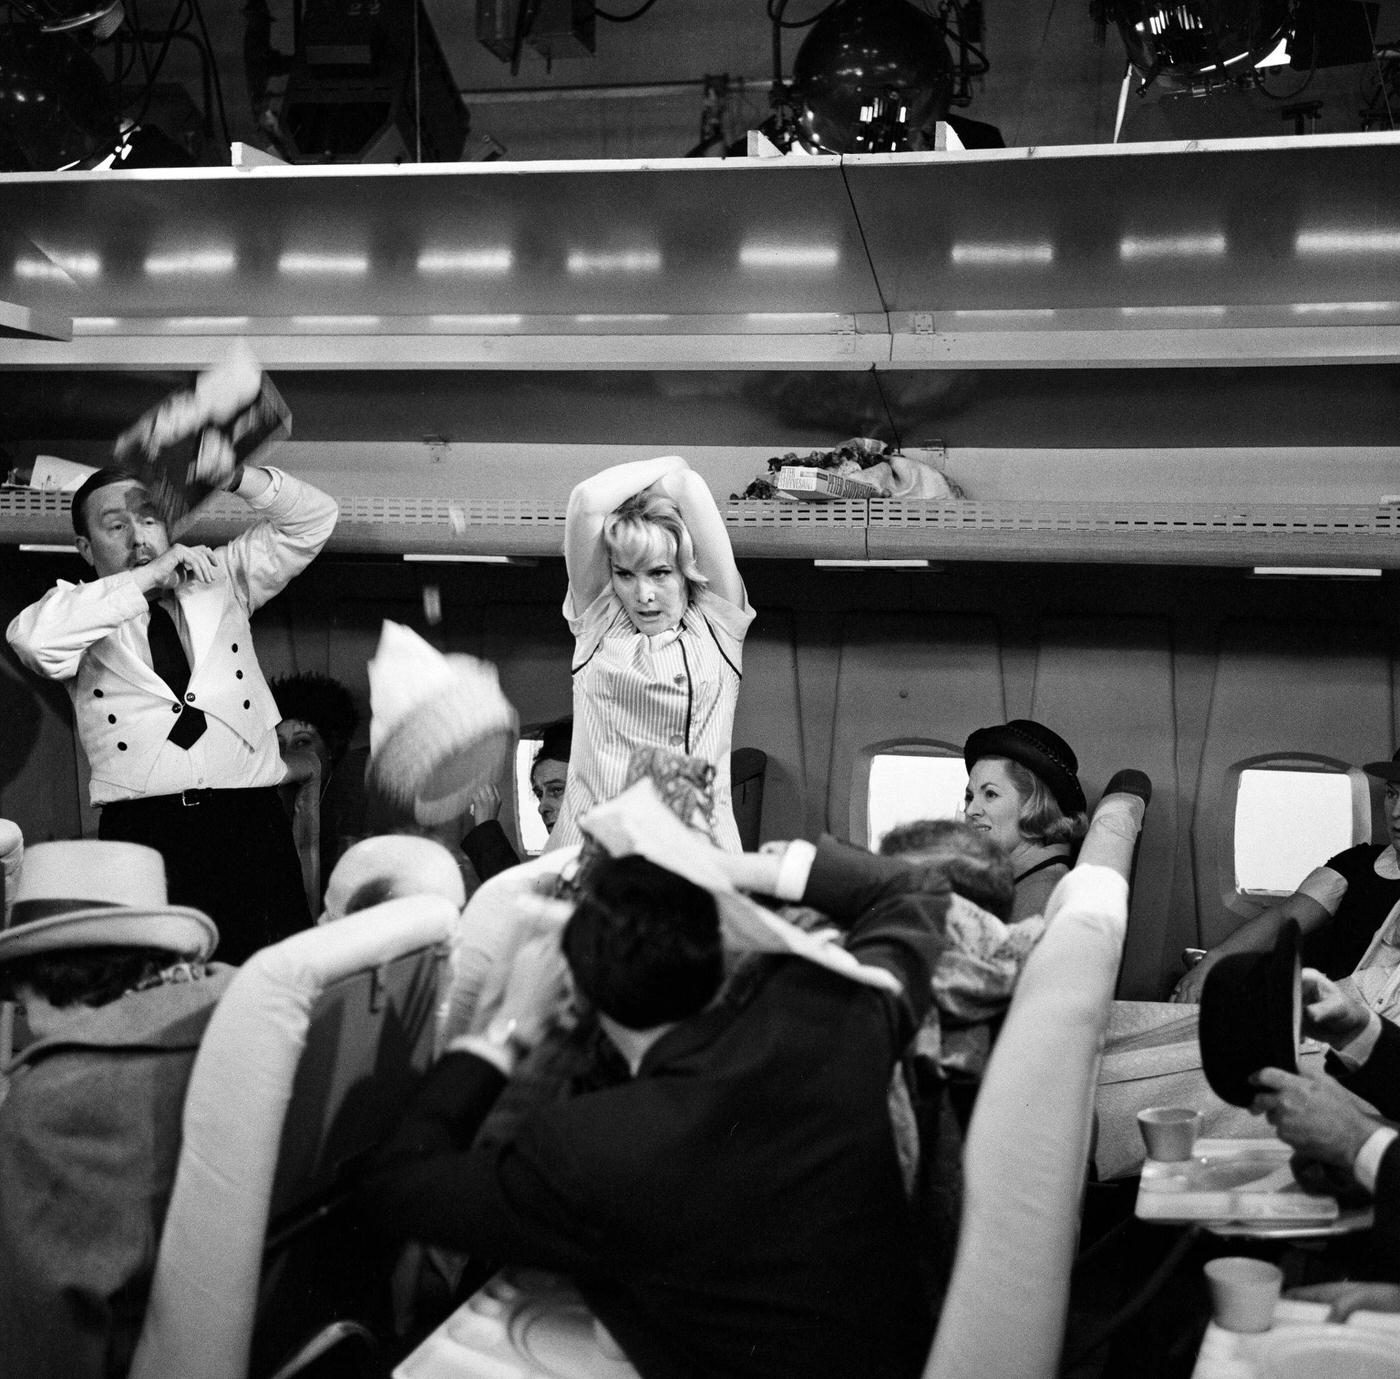 Sheila Hancock playing the role of an air hostess in scenes being shot for the comedy series "The Bed-Sit Girl" at BBC Studios on February 21, 1965.